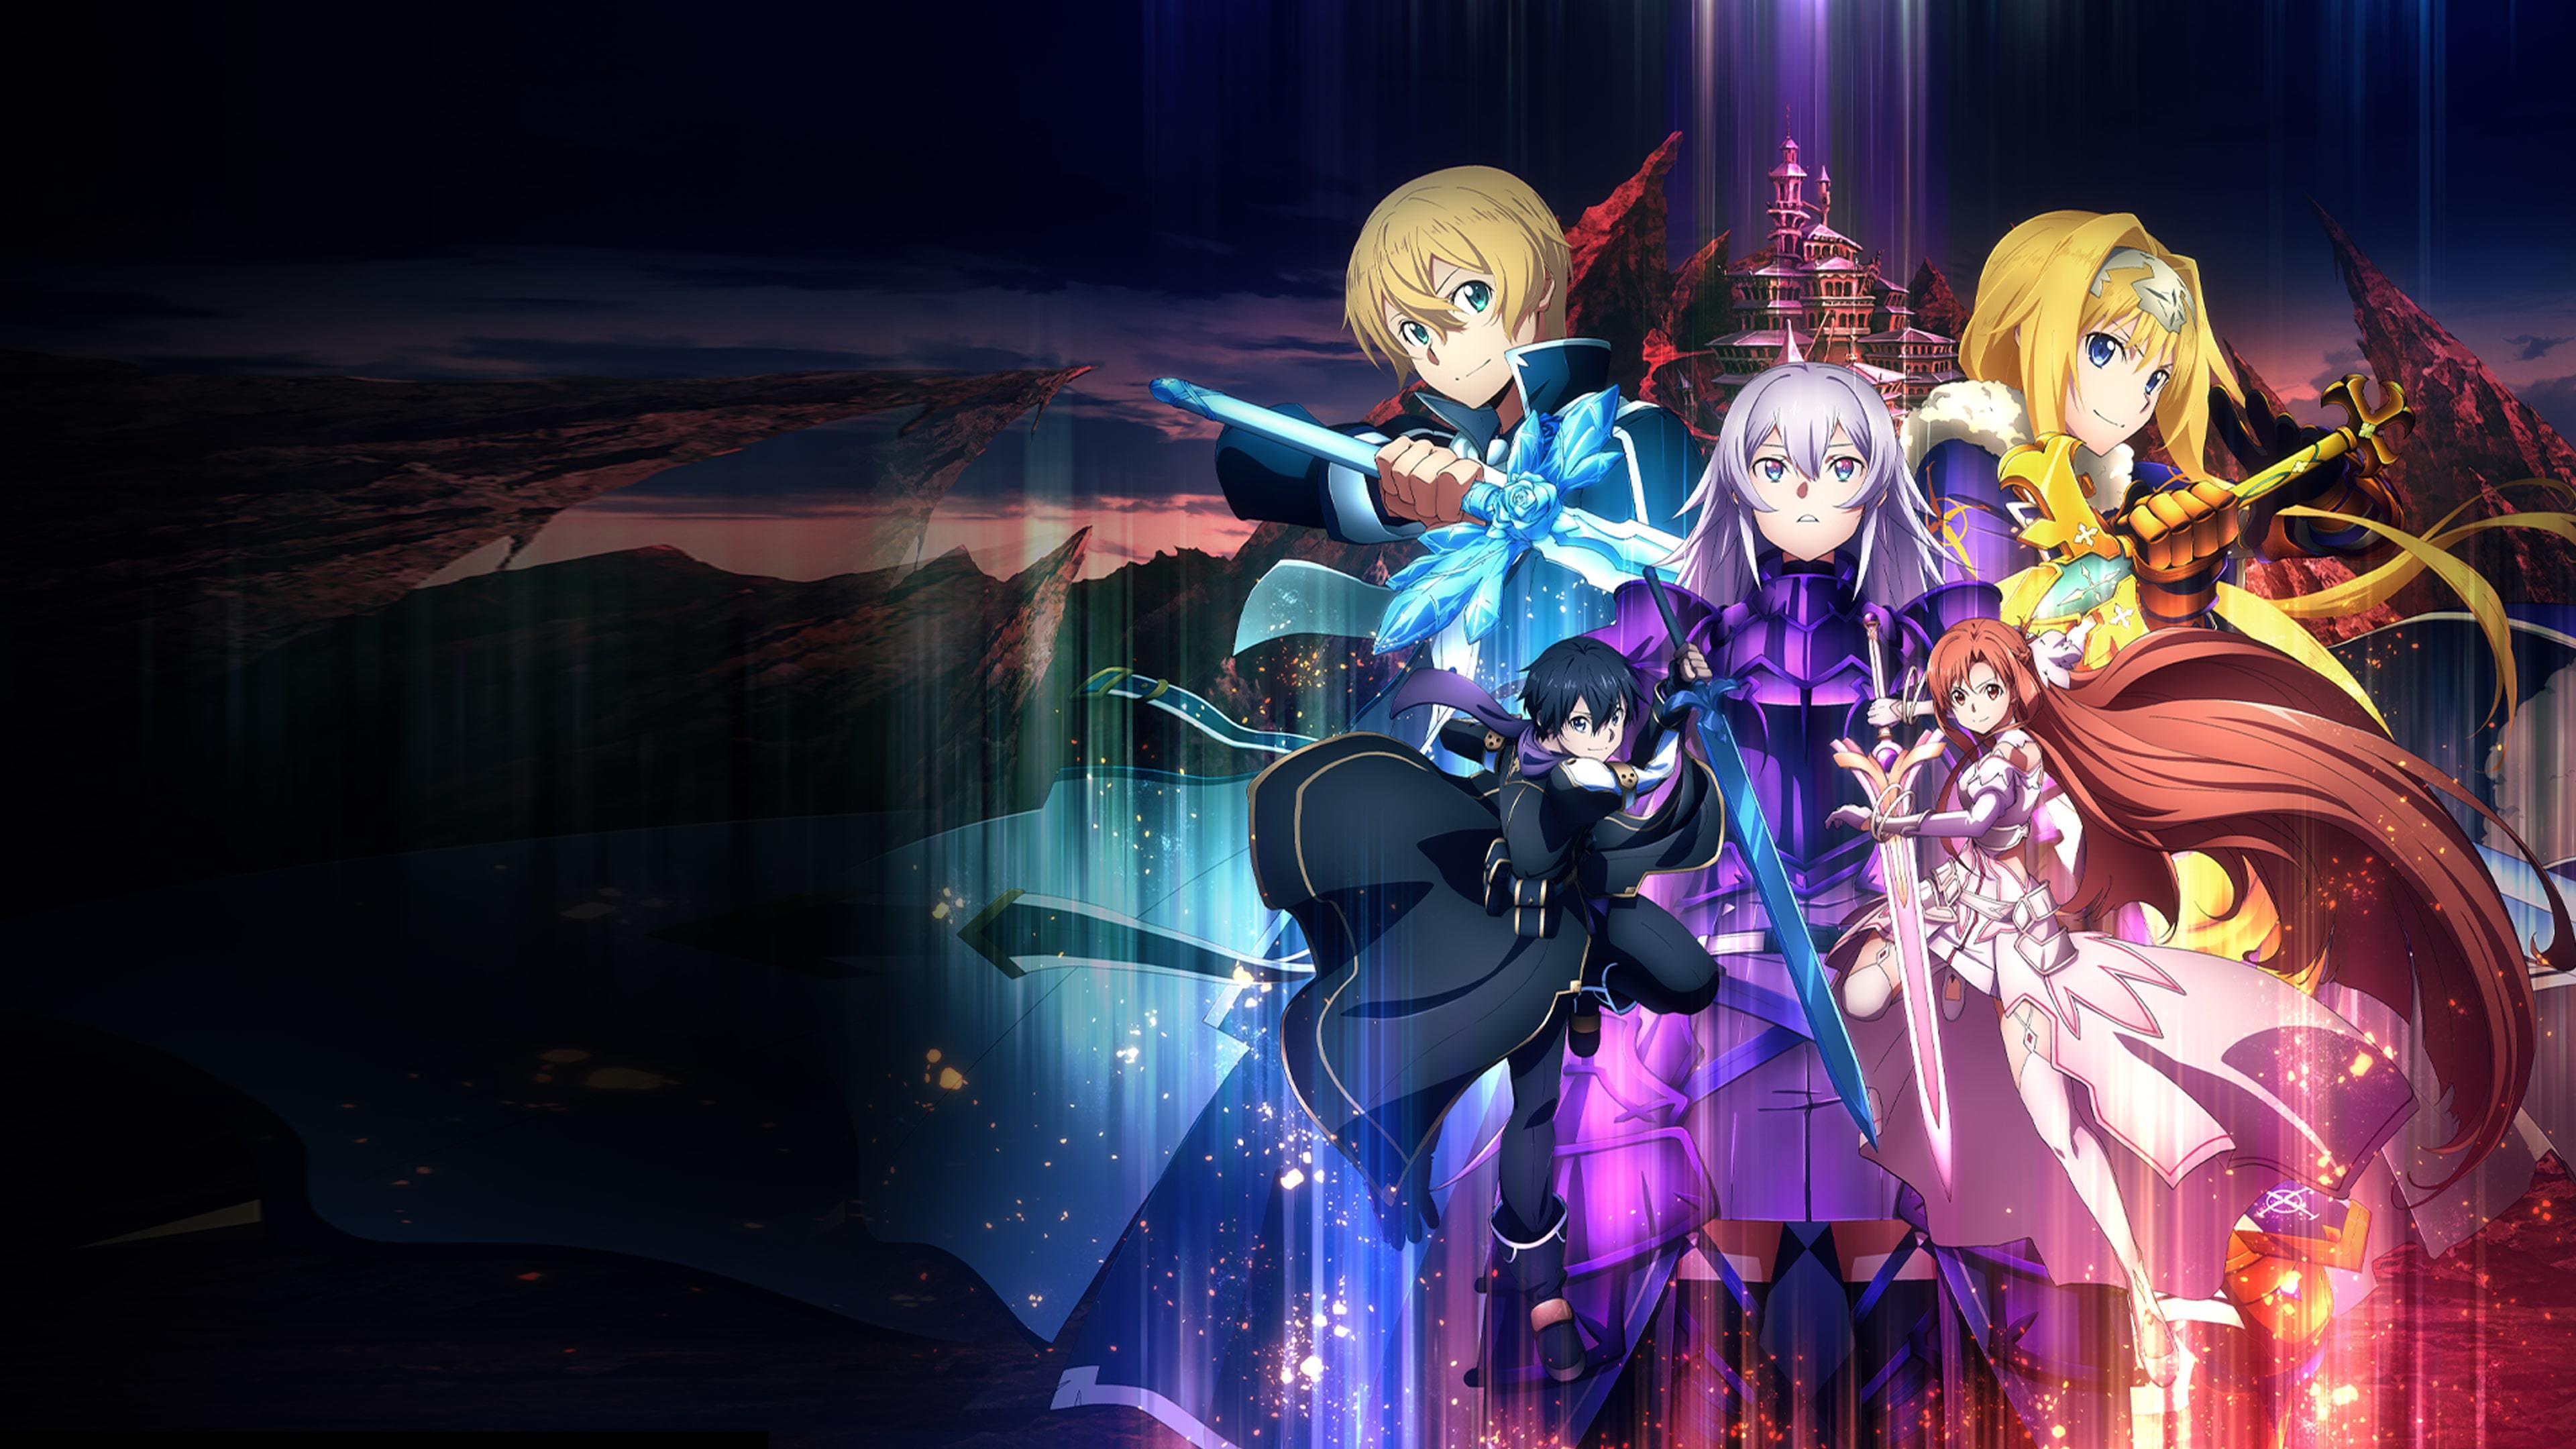 Banner of SWORD ART ONLINE Huling Recollection PS4 & PS5 